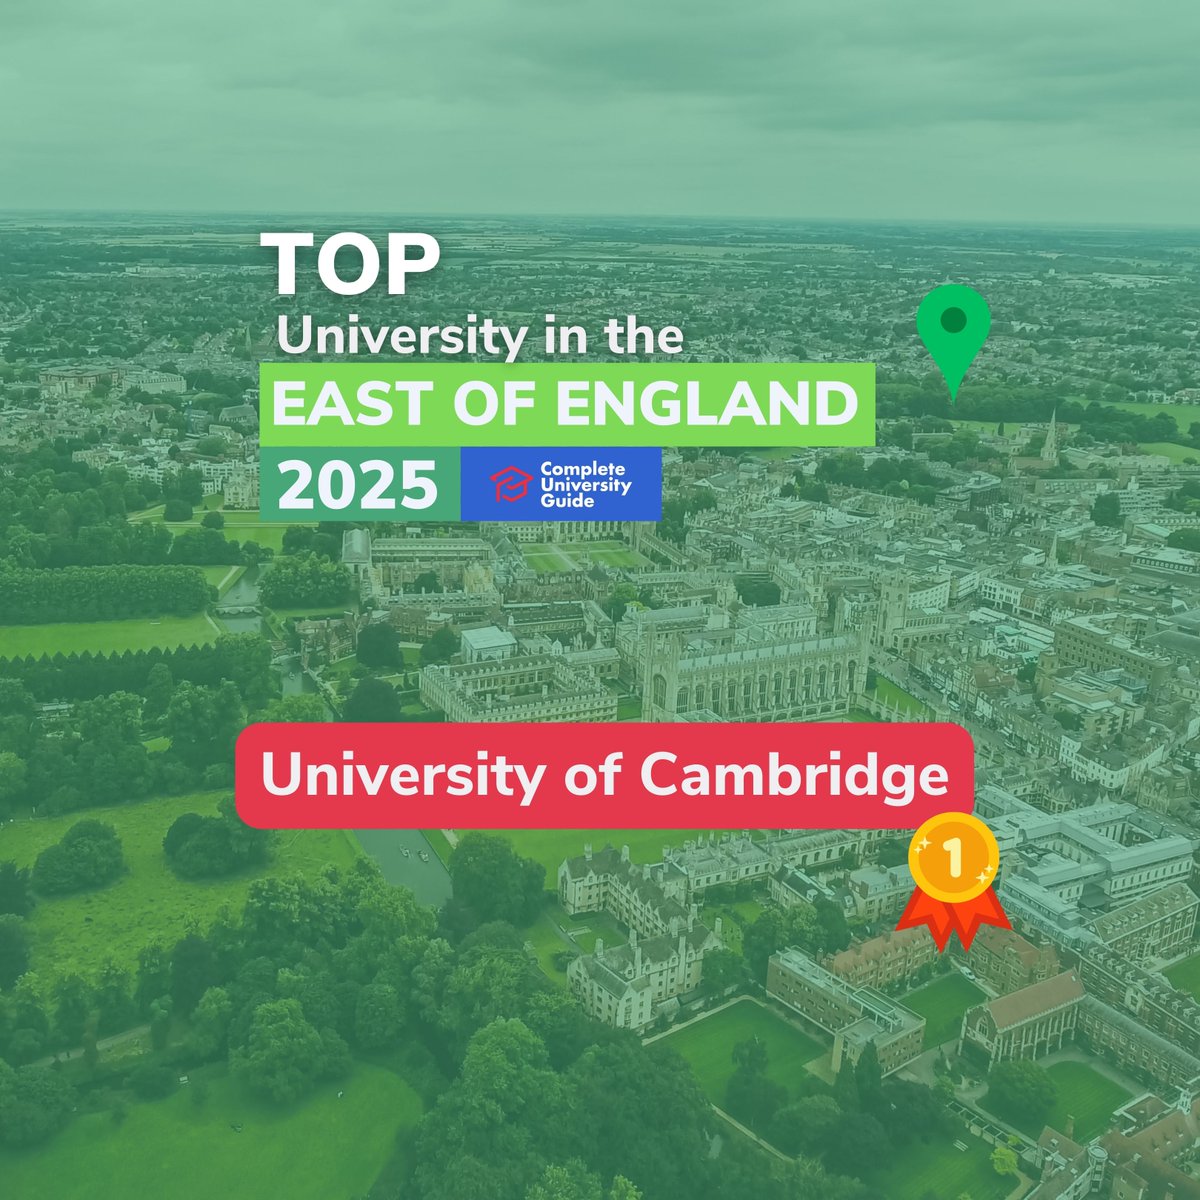 Well done to @Cambridge_Uni for coming top in the East of England region table.

Find the full league table here: 
👉 bit.ly/3K5zW2Z

#leaguetables2025 #leaguetables #rankings #university